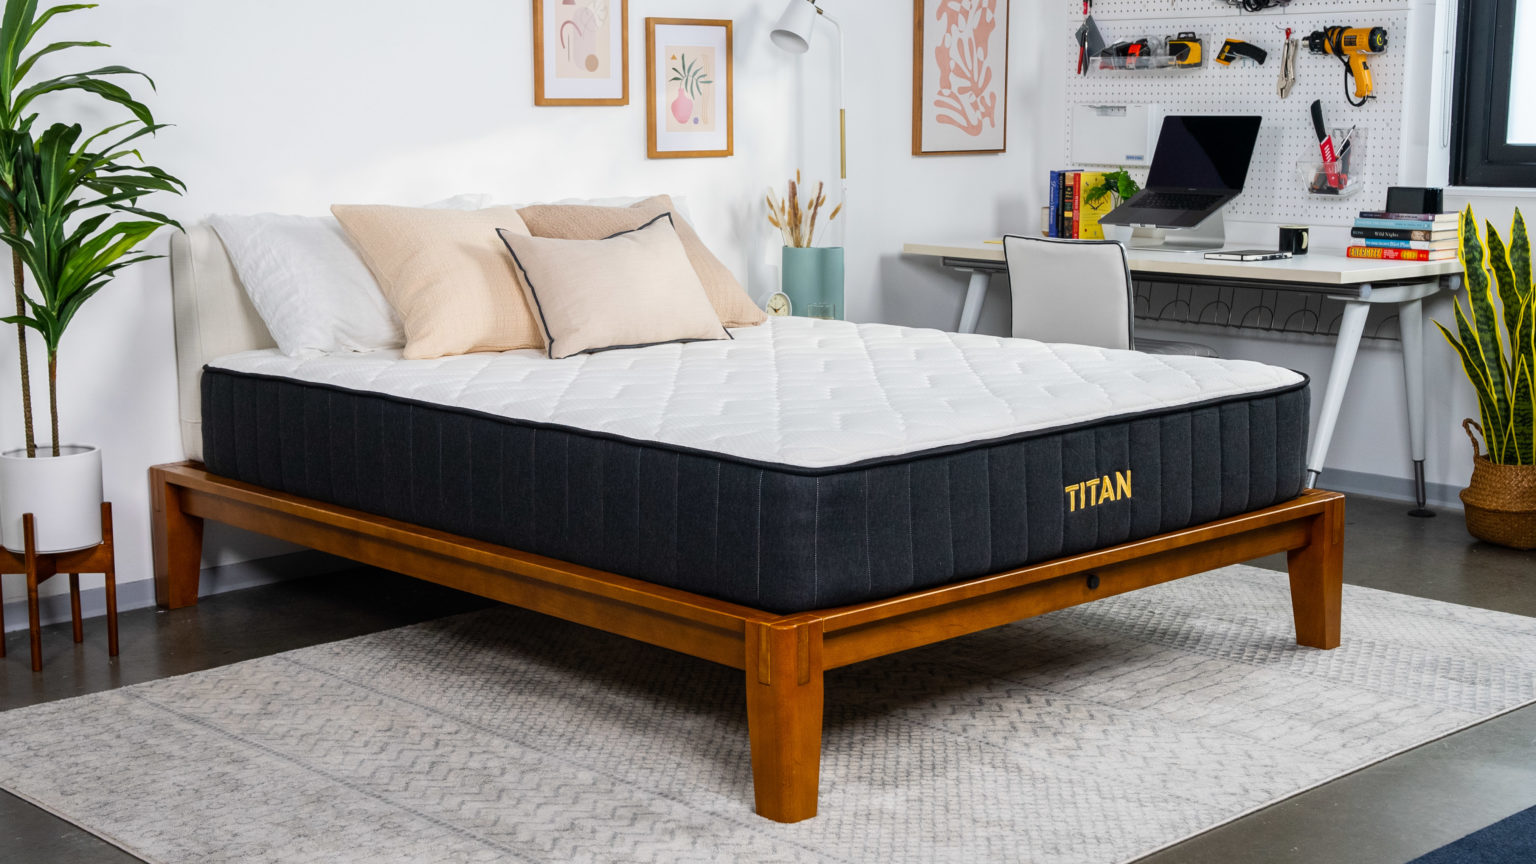 can i buy elite mattress in usa